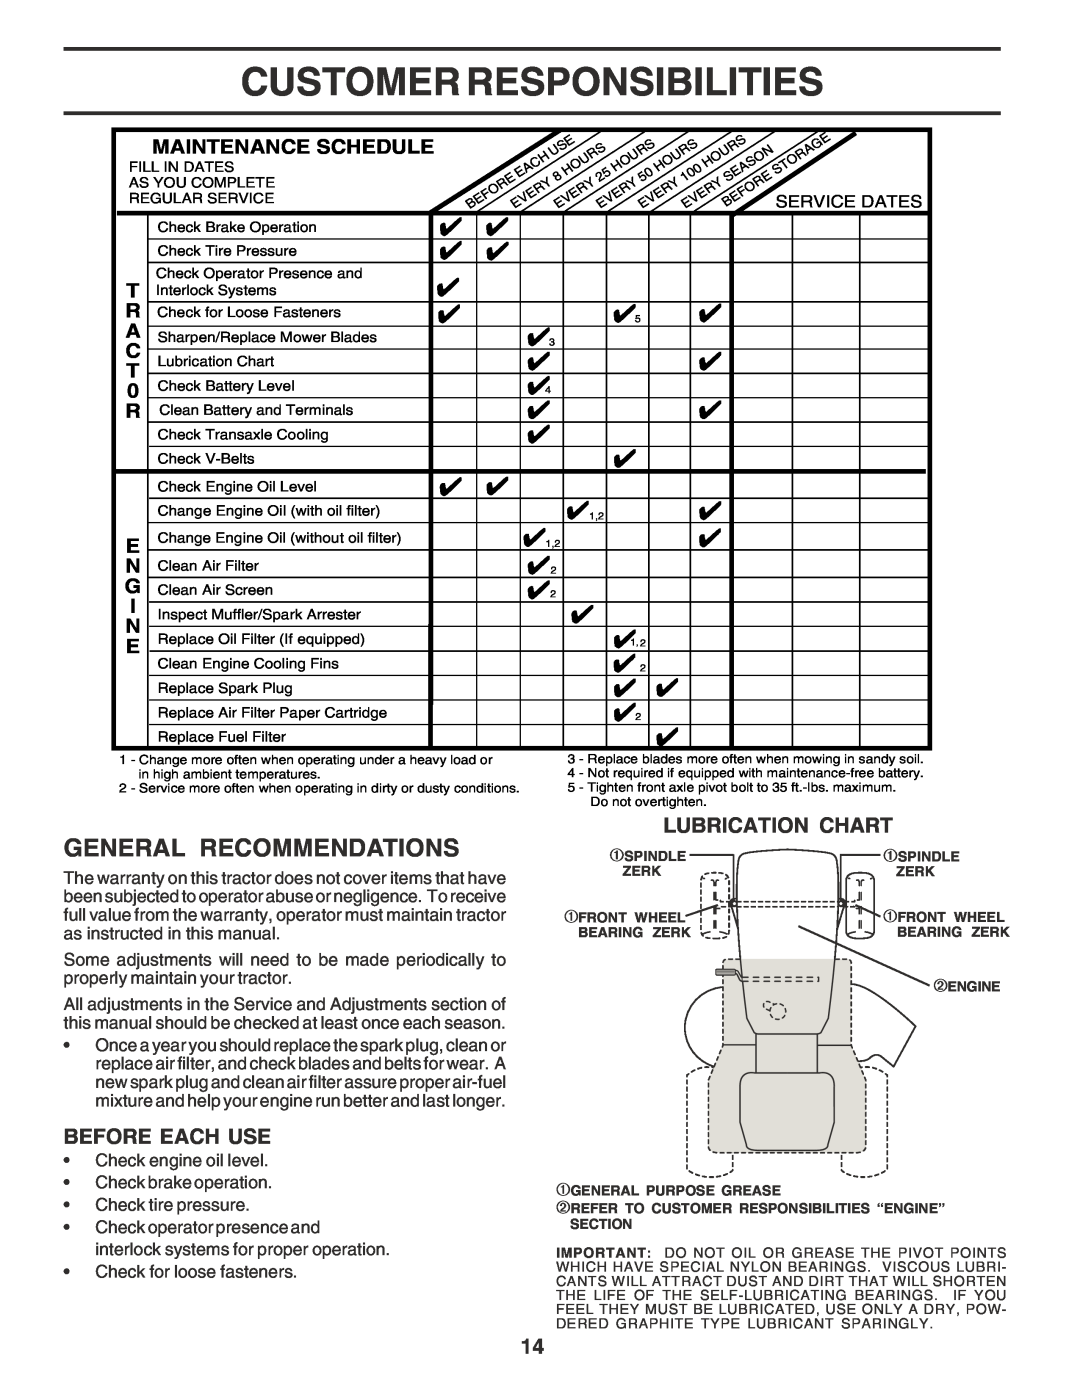 Weed Eater WE1538B manual Customer Responsibilities, General Recommendations, Before Each Use, Lubrication Chart 